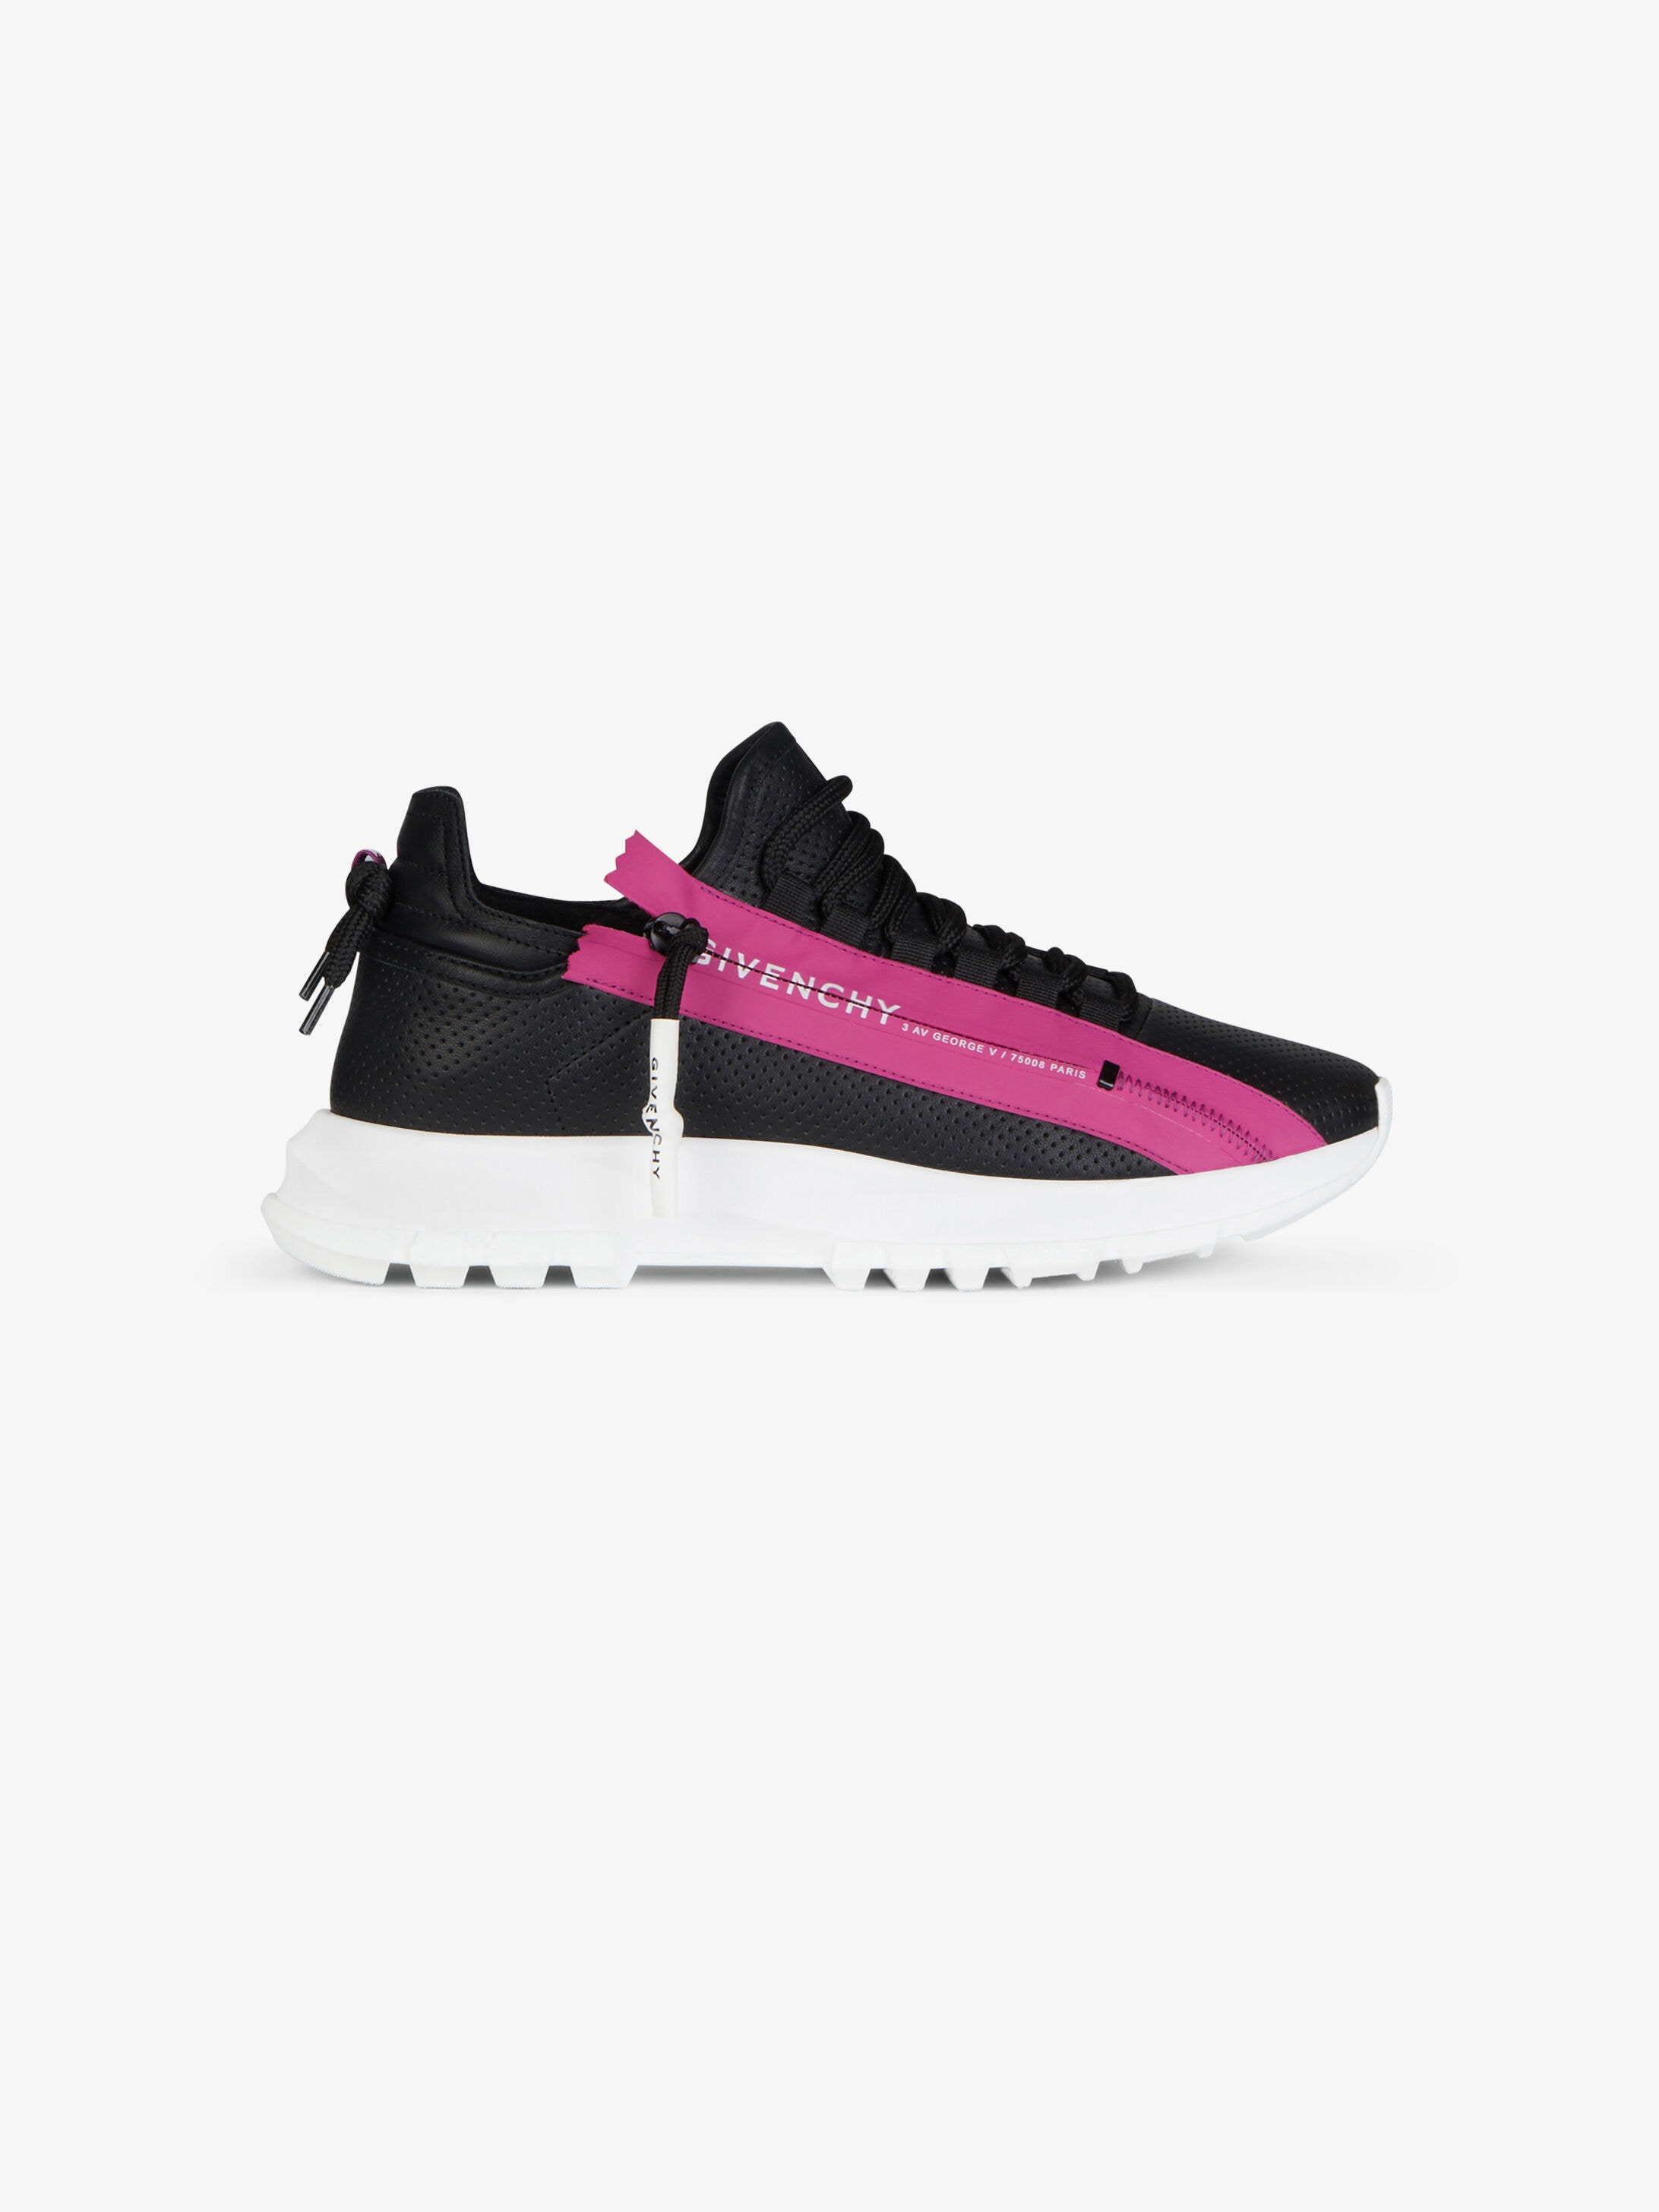 givenchy sneakers womens